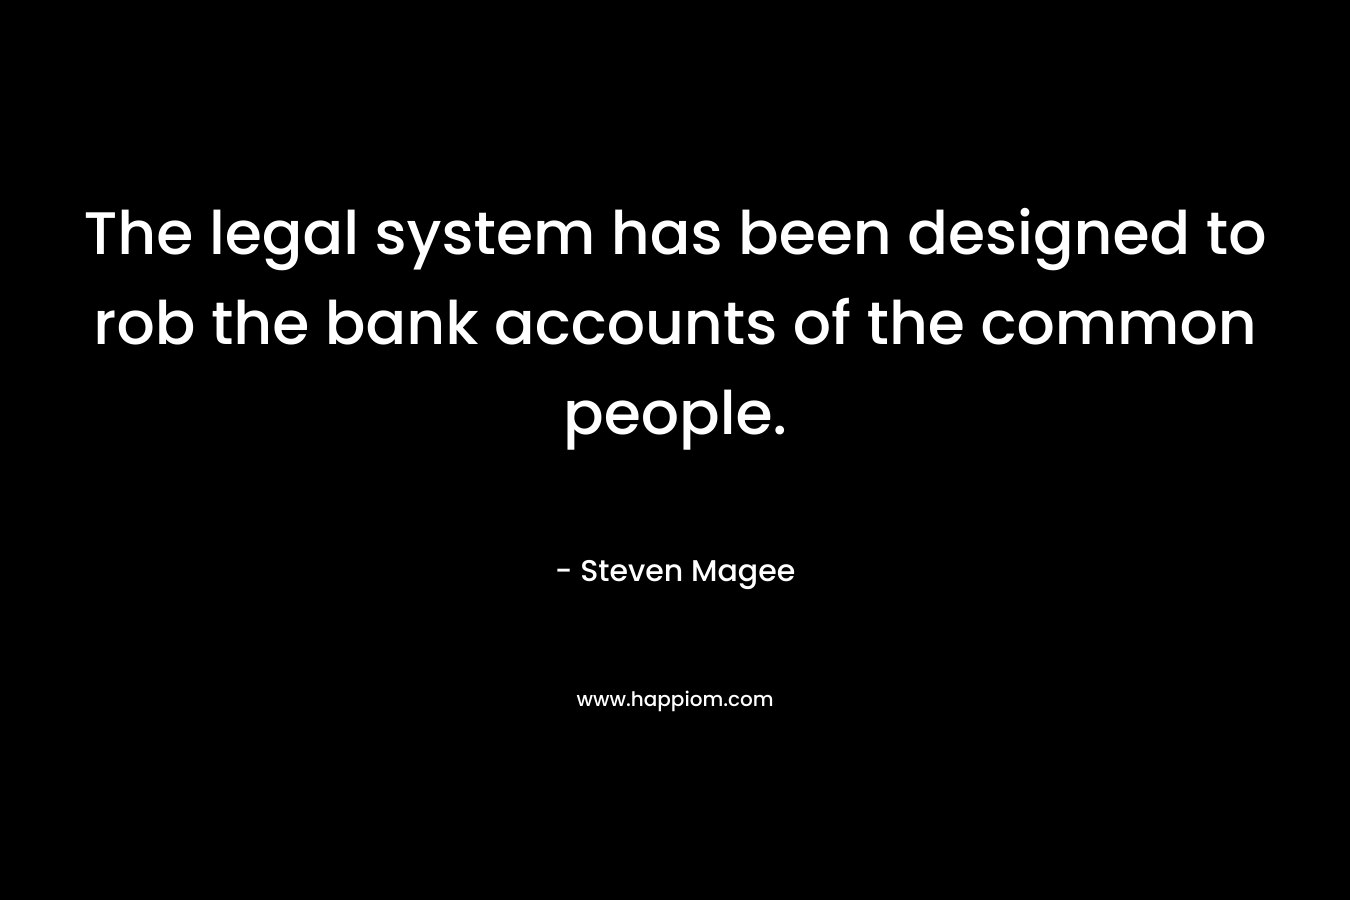 The legal system has been designed to rob the bank accounts of the common people. – Steven Magee